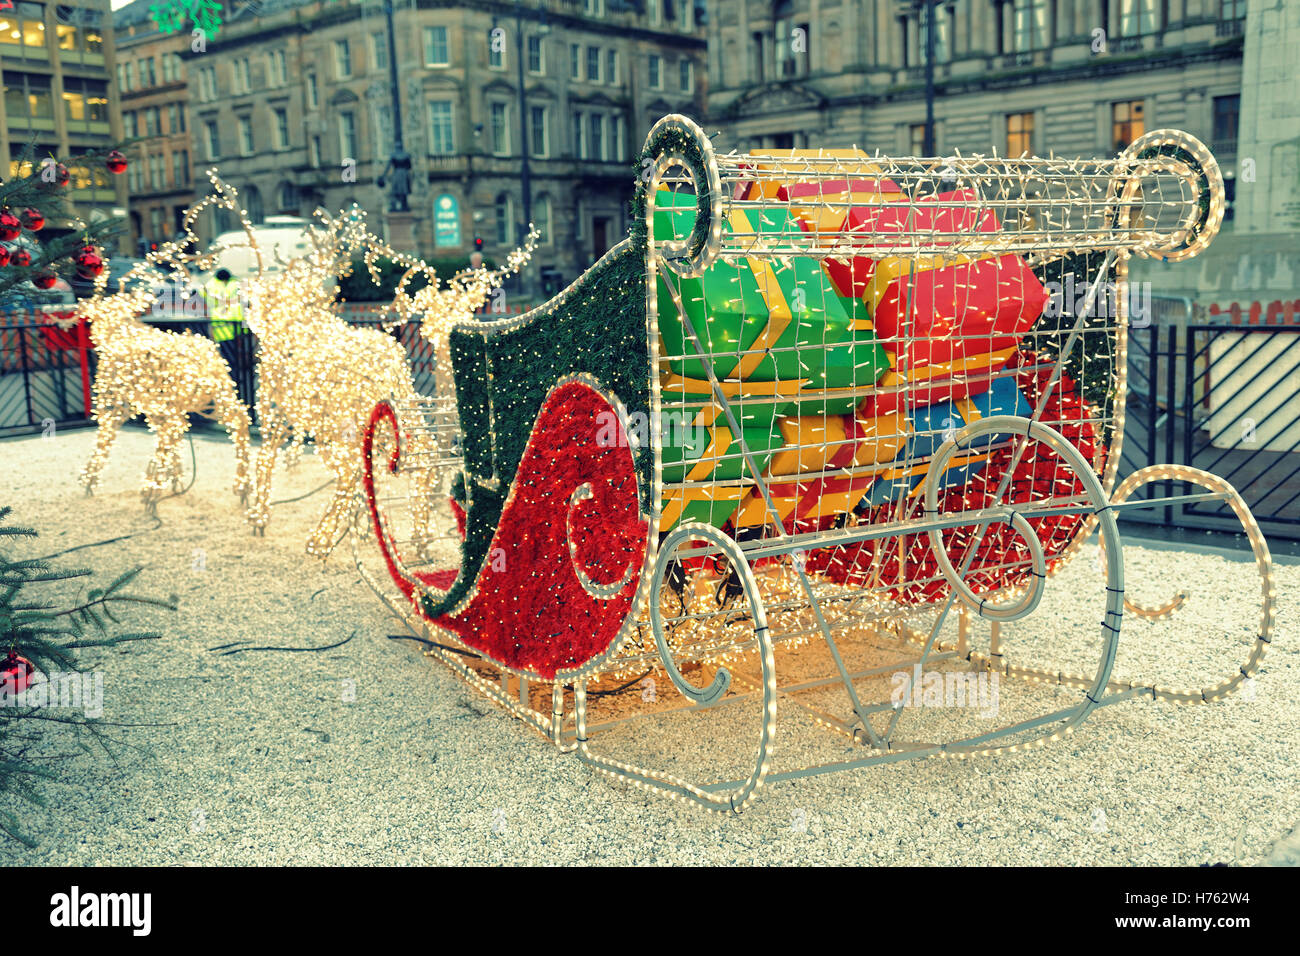 Glasgow Loves Christmas celebration George Square lights reindeer and sleigh decorations Glasgow Christmas Market Stock Photo